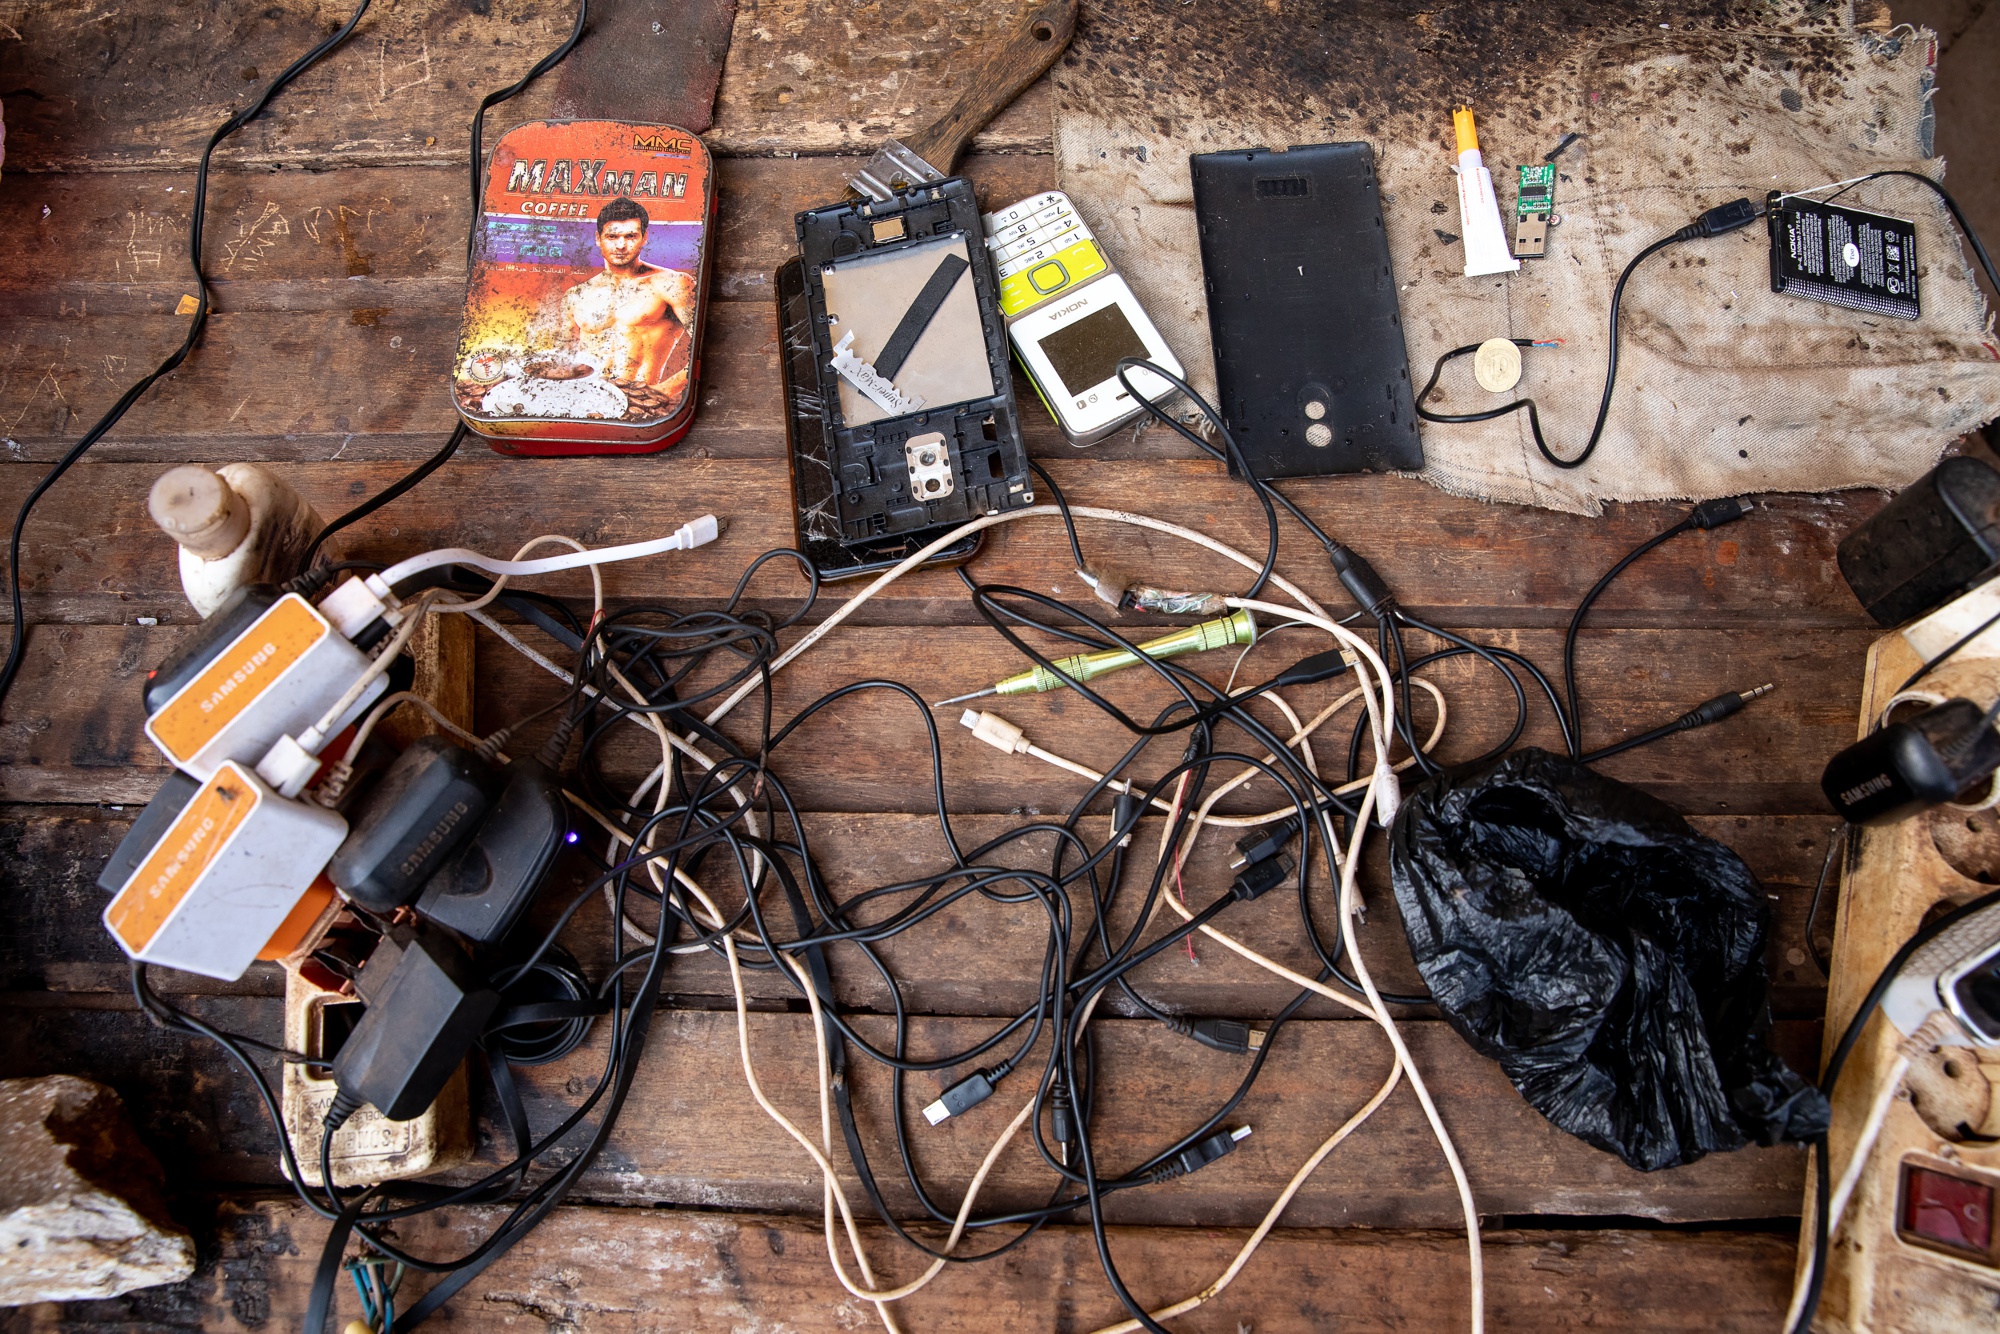 Charging cables, a disassembled mobile phone and tools sit on a work bench at a phone repair kiosk in Bangui Central African Republic, on Friday, March 15, 2019.&nbsp;